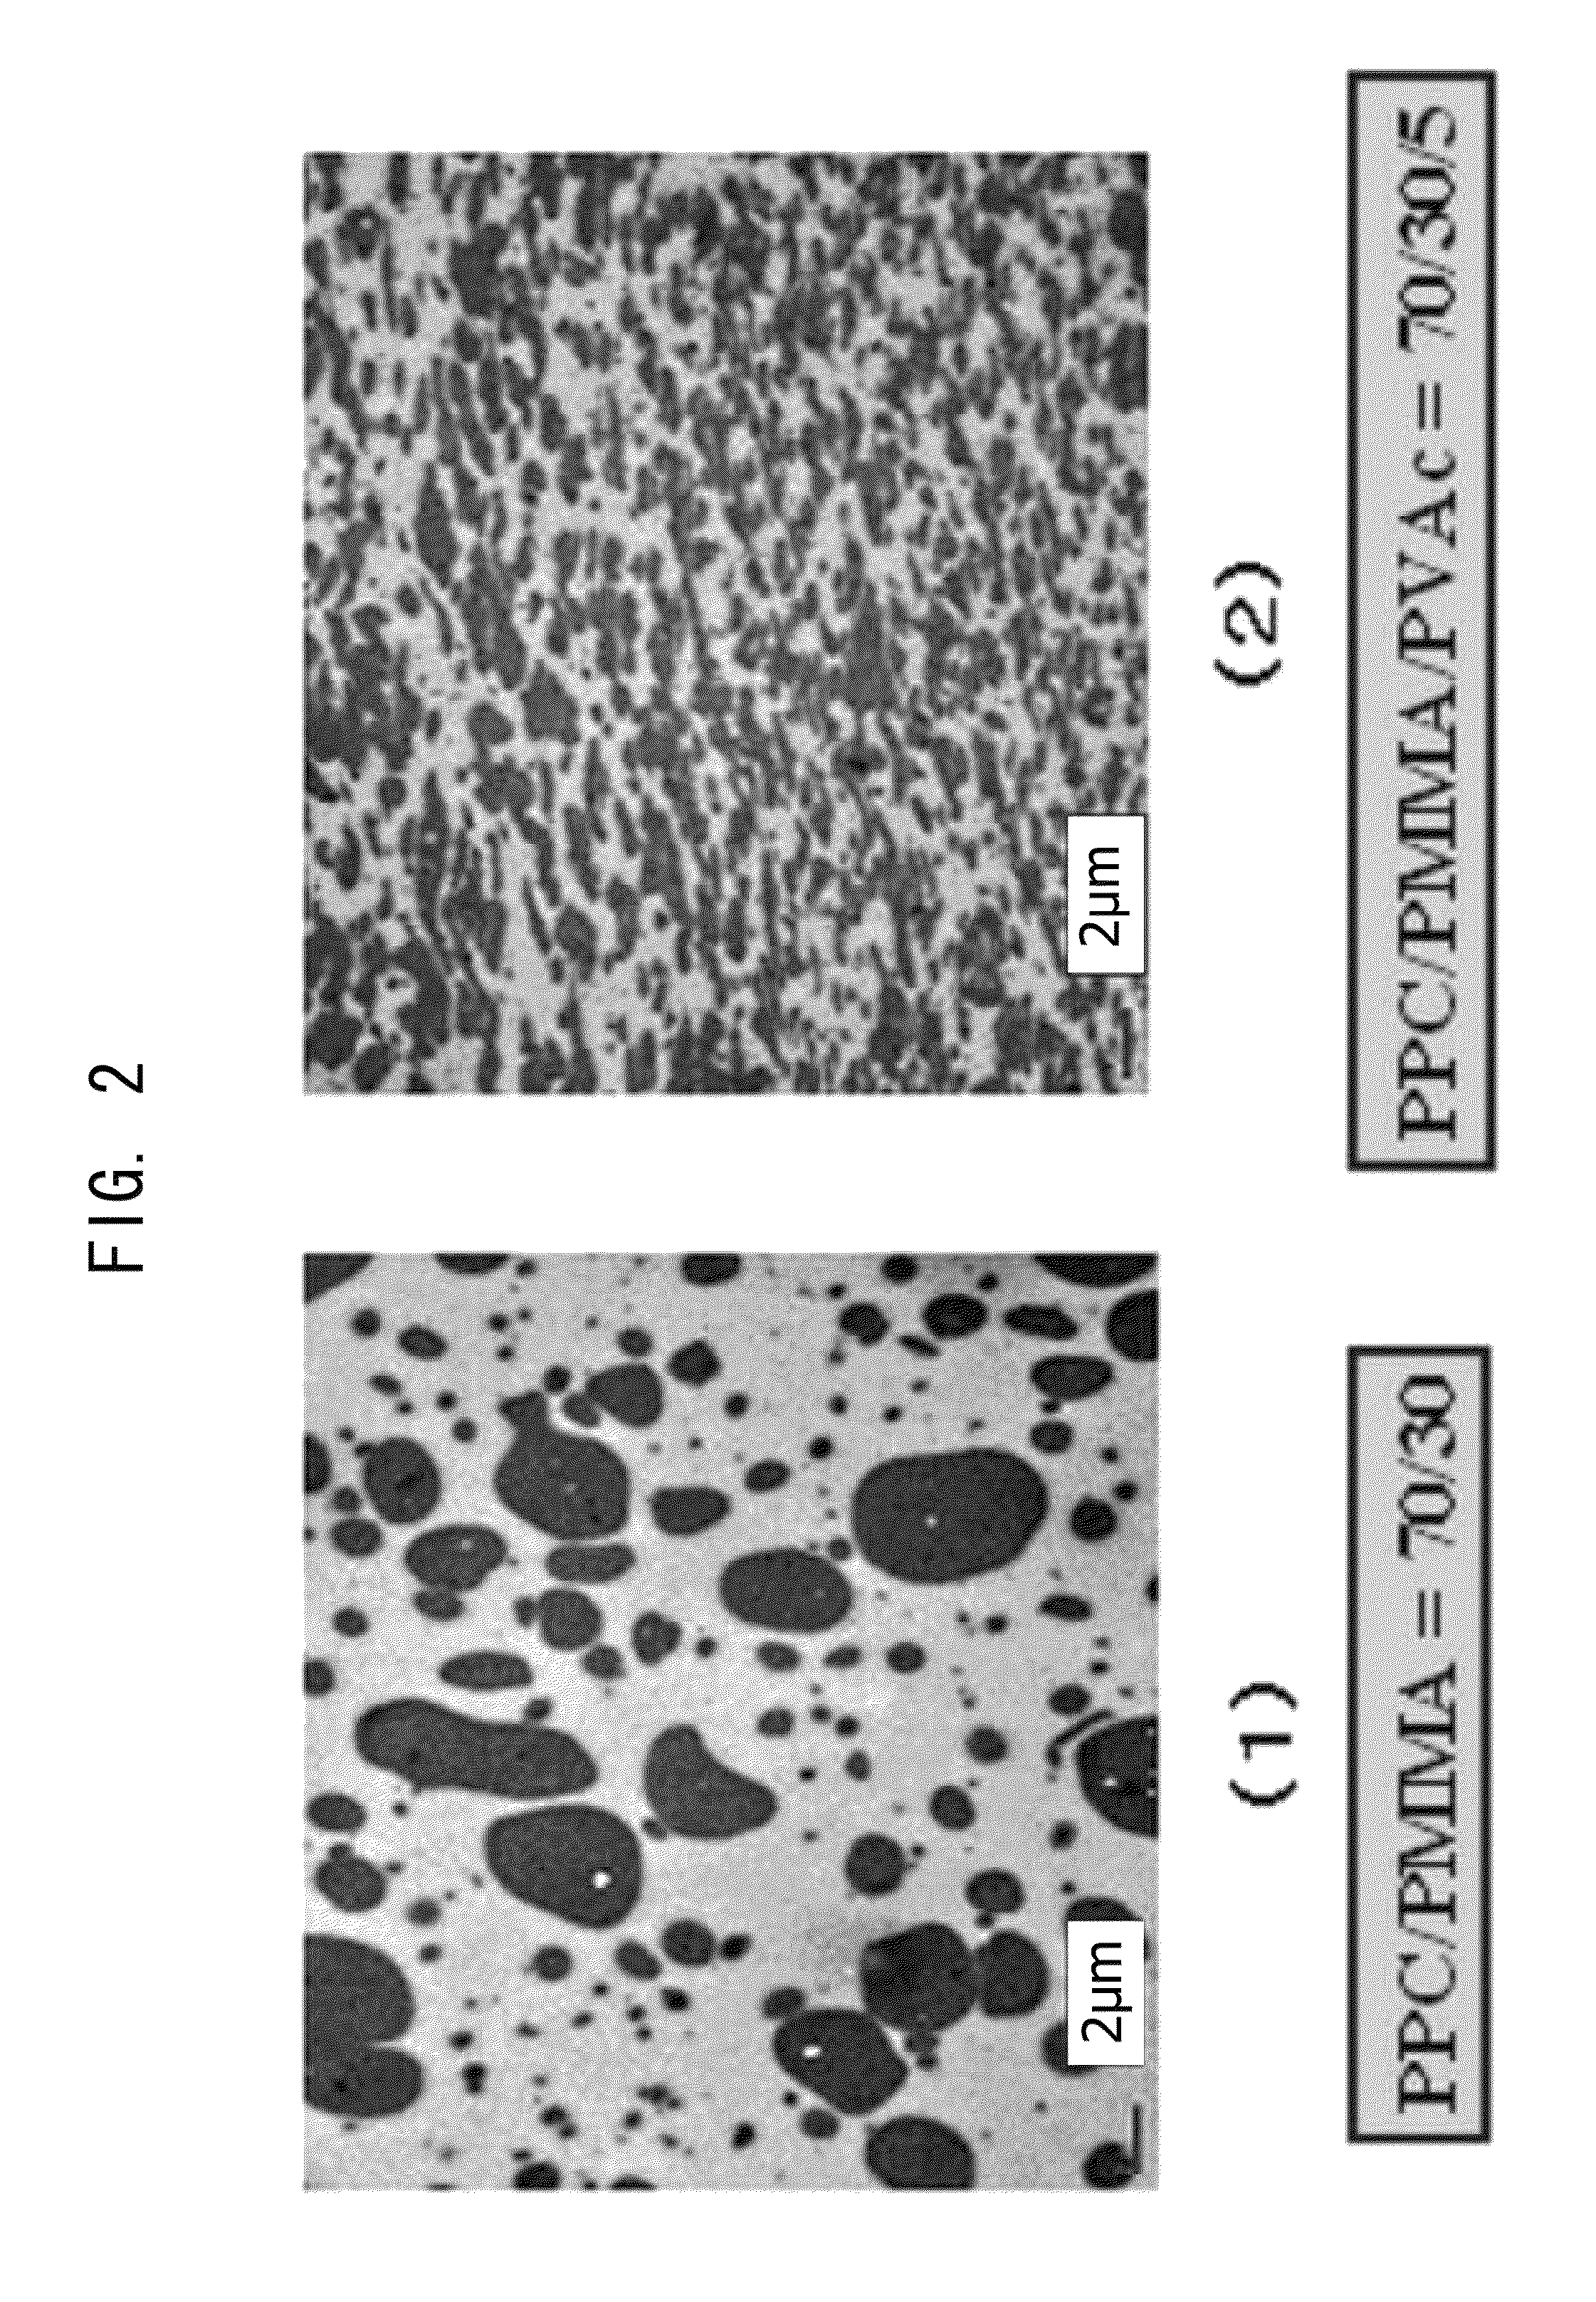 Ternary blends of aliphatic polycarbonate derived from carbon dioxide, and process for producing same